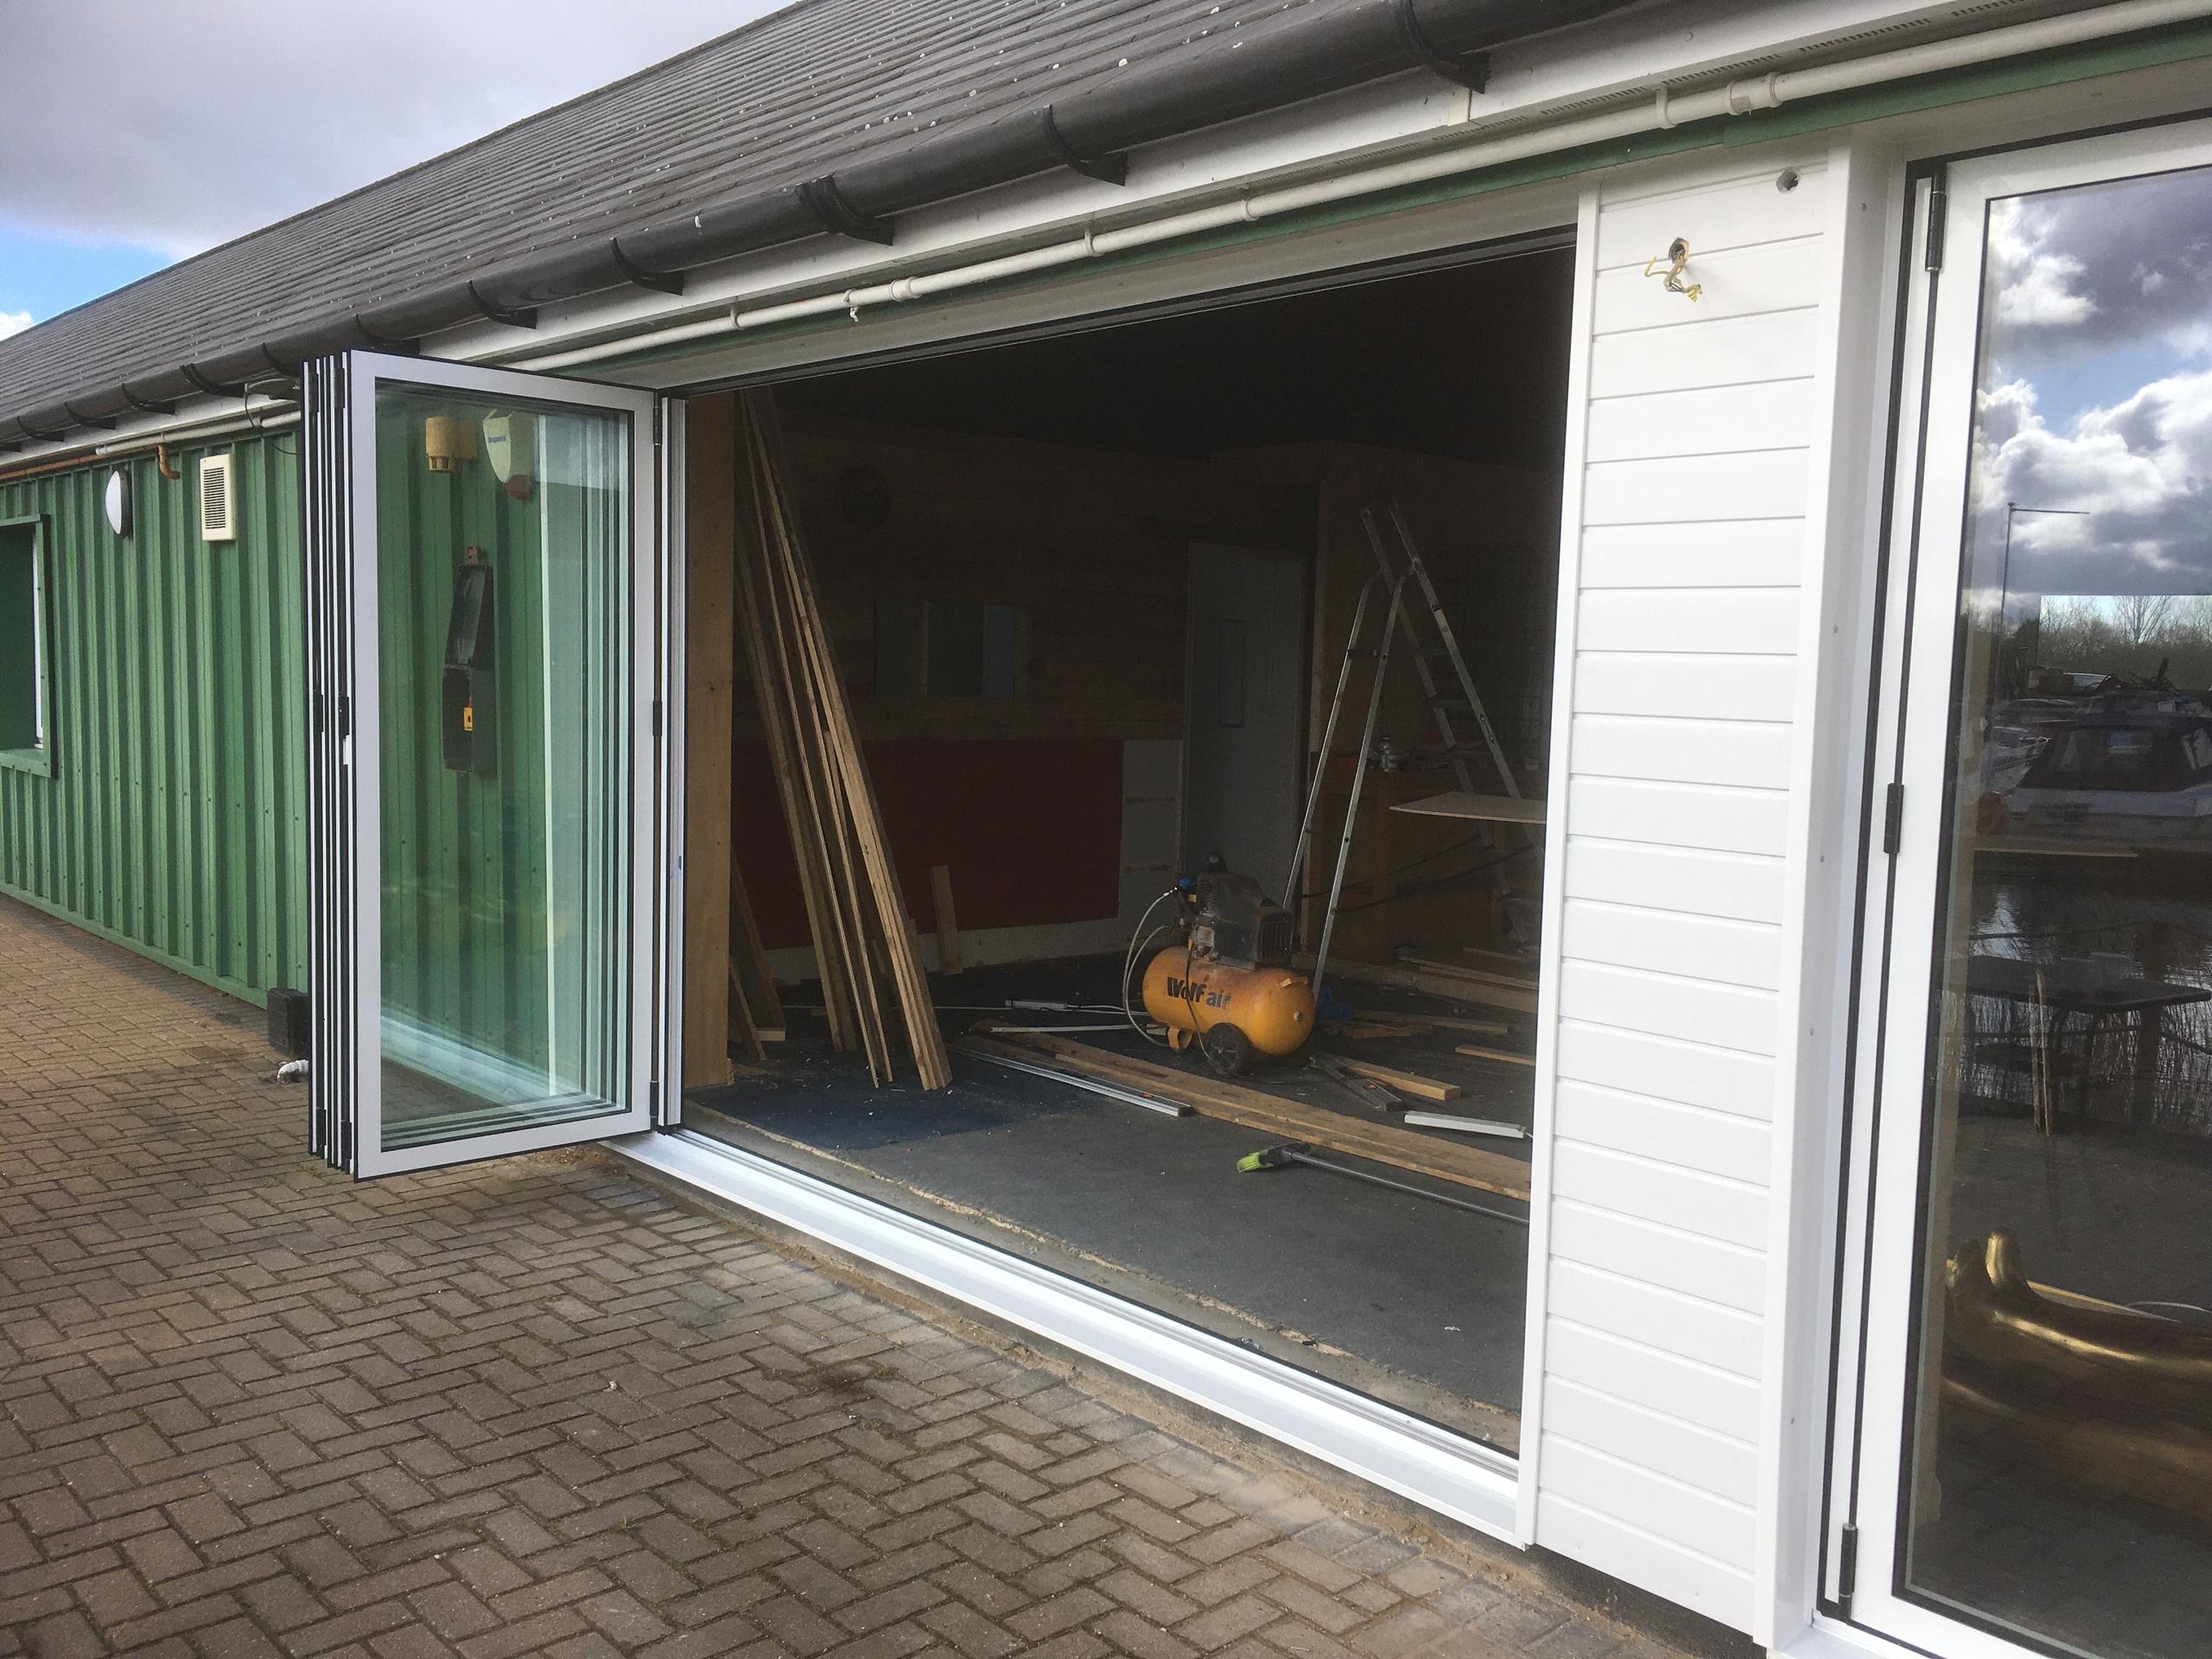 Completion of the 2 bifold doors with cladding to cover the supporting pier